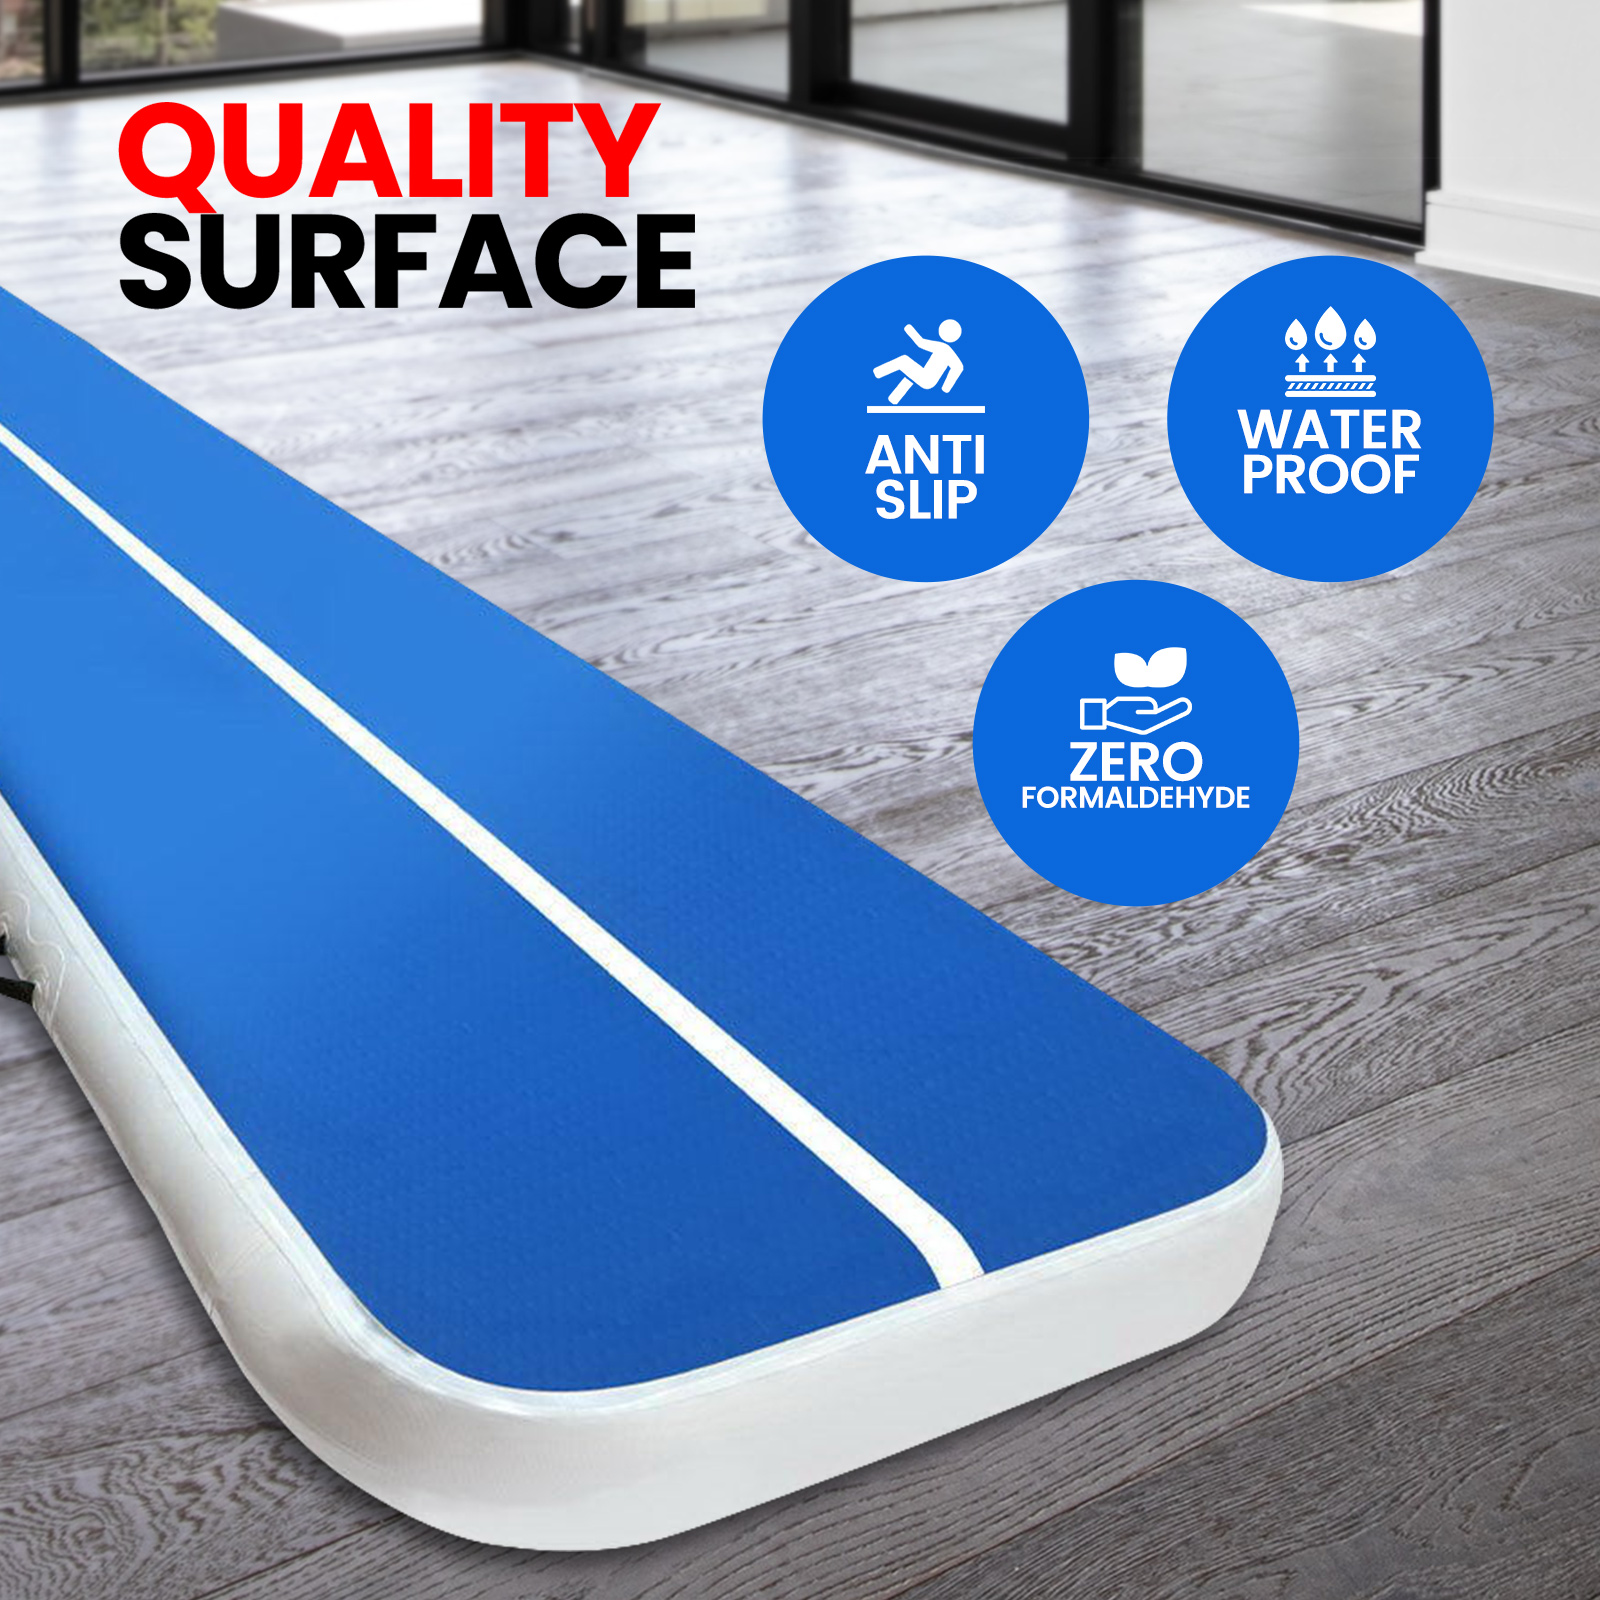 Gymnastic 6m x 1m Inflatable Air Track Mat 20cm Thick Tumbling Blue And White